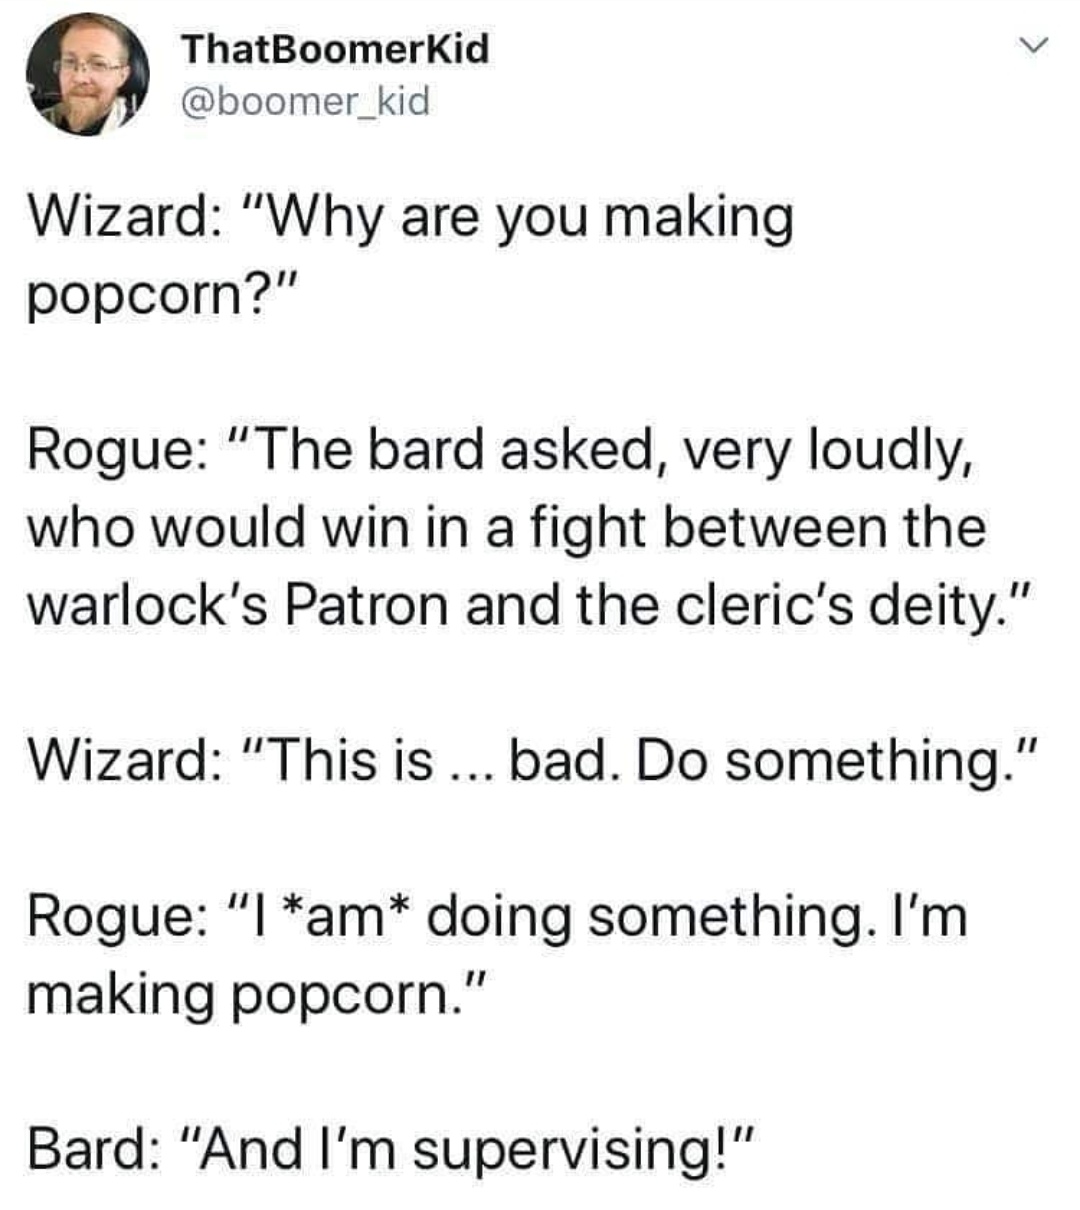 dnd bard memes - ThatBoomerKid Wizard "Why are you making popcorn?" Rogue "The bard asked, very loudly, who would win in a fight between the warlock's Patron and the cleric's deity." Wizard "This is ... bad. Do something." Rogue "I am doing something. I'm